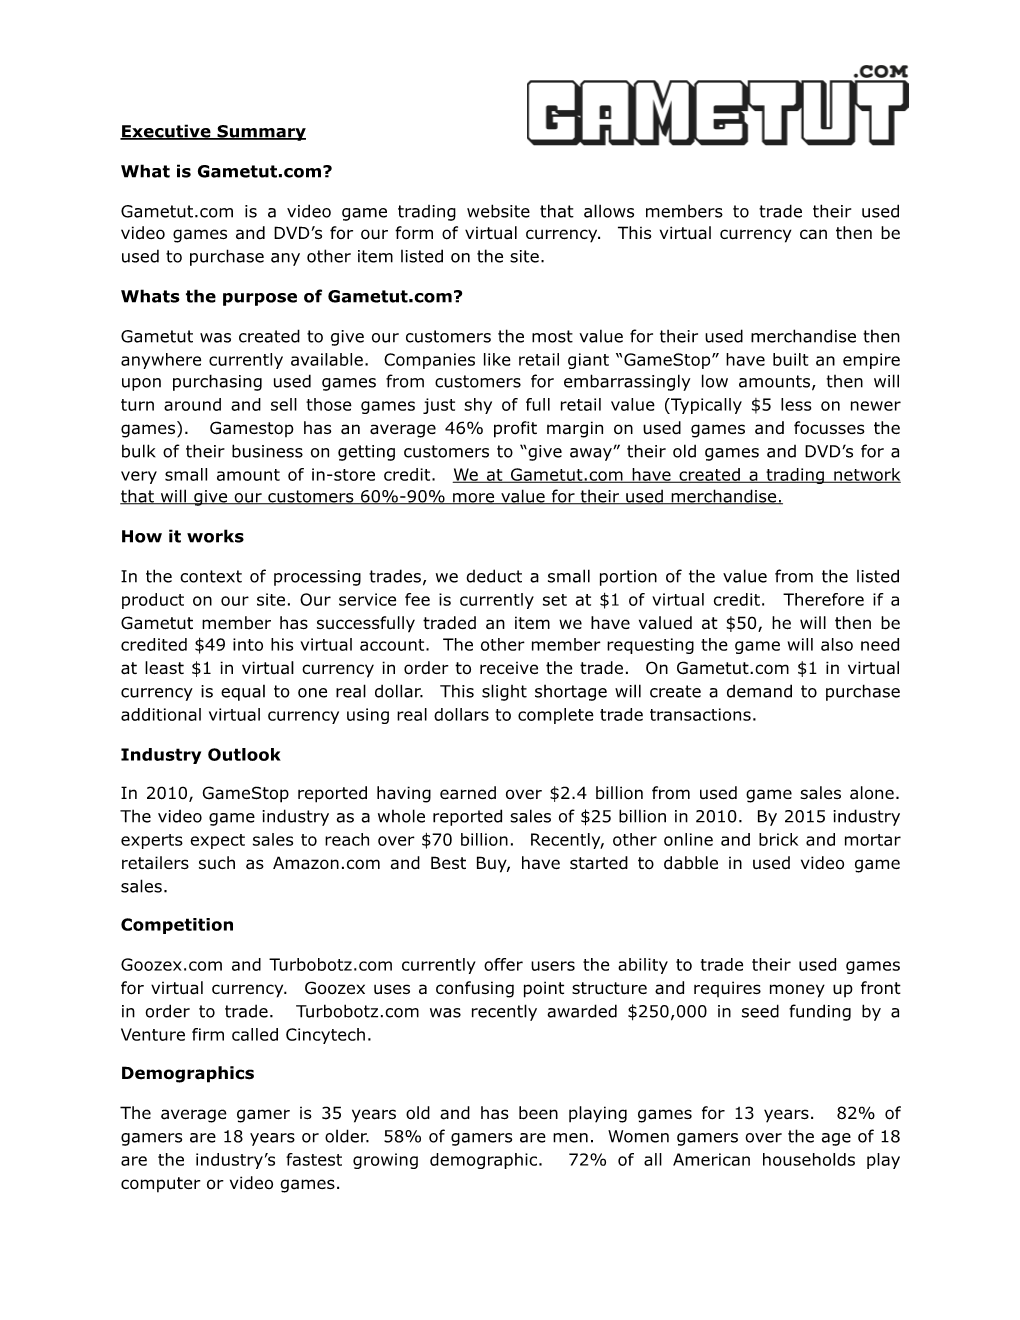 Executive Summary What Is Gametut.Com?